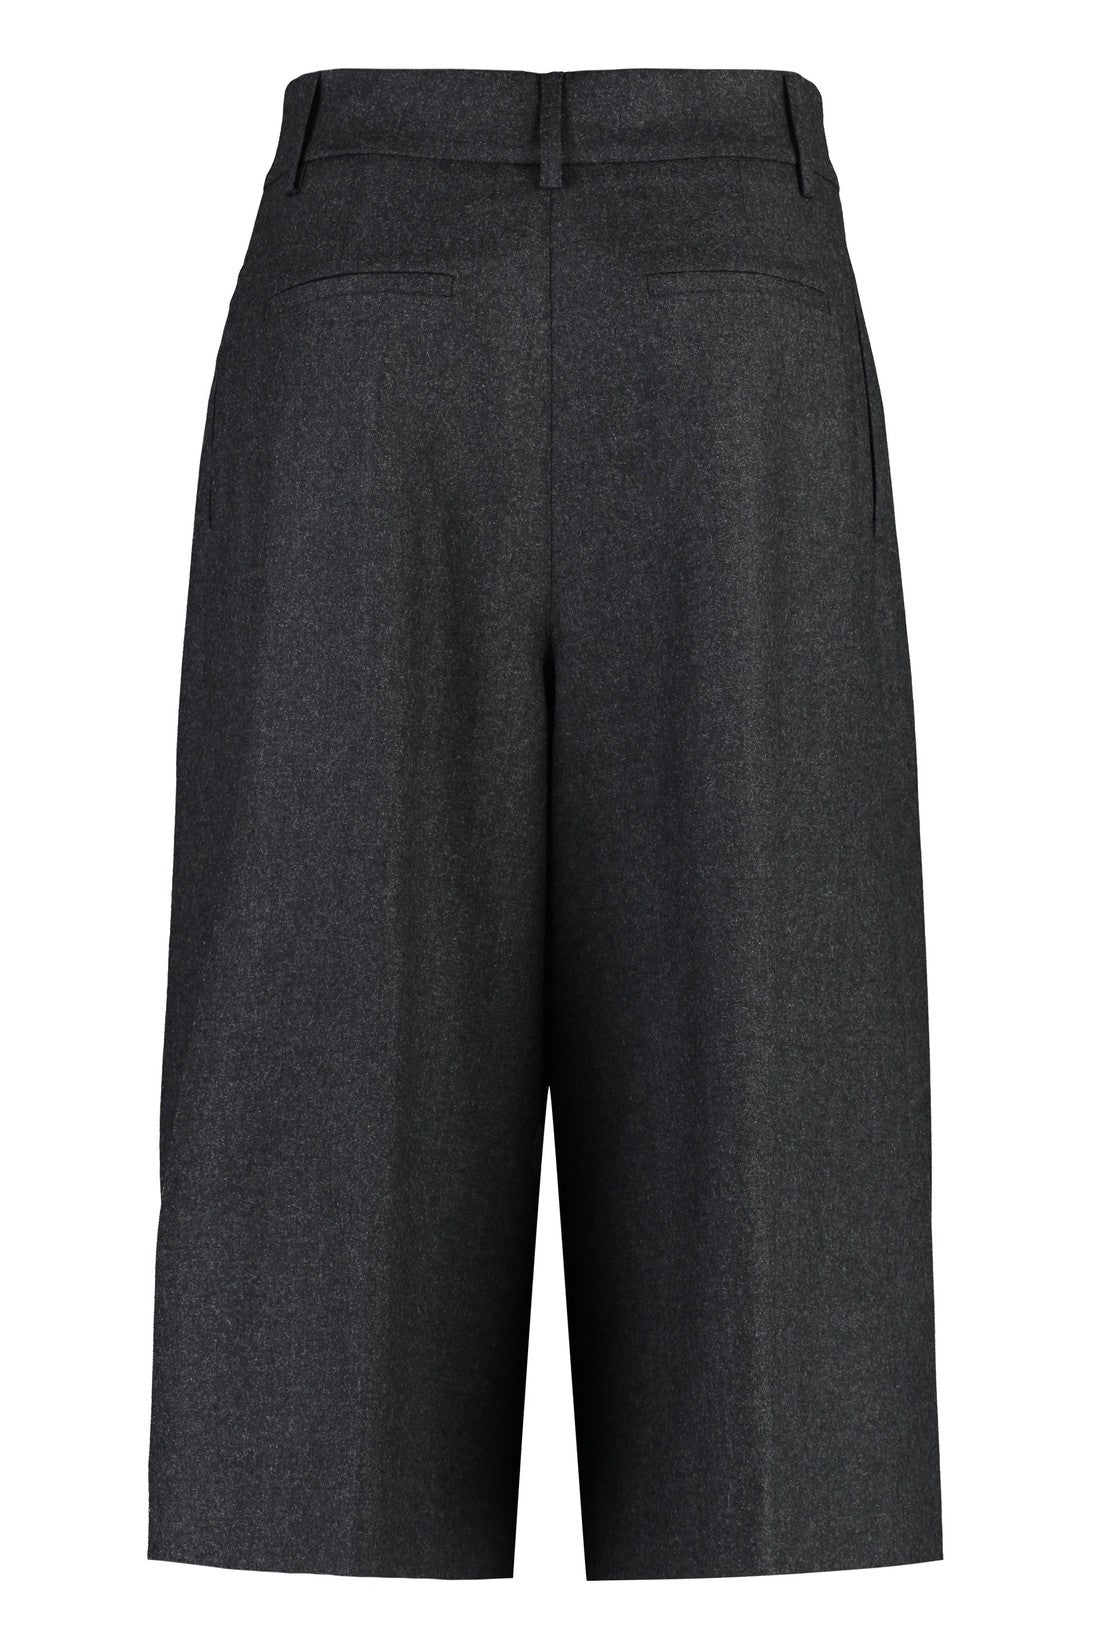 Parosh-OUTLET-SALE-Wool cropped trousers-ARCHIVIST